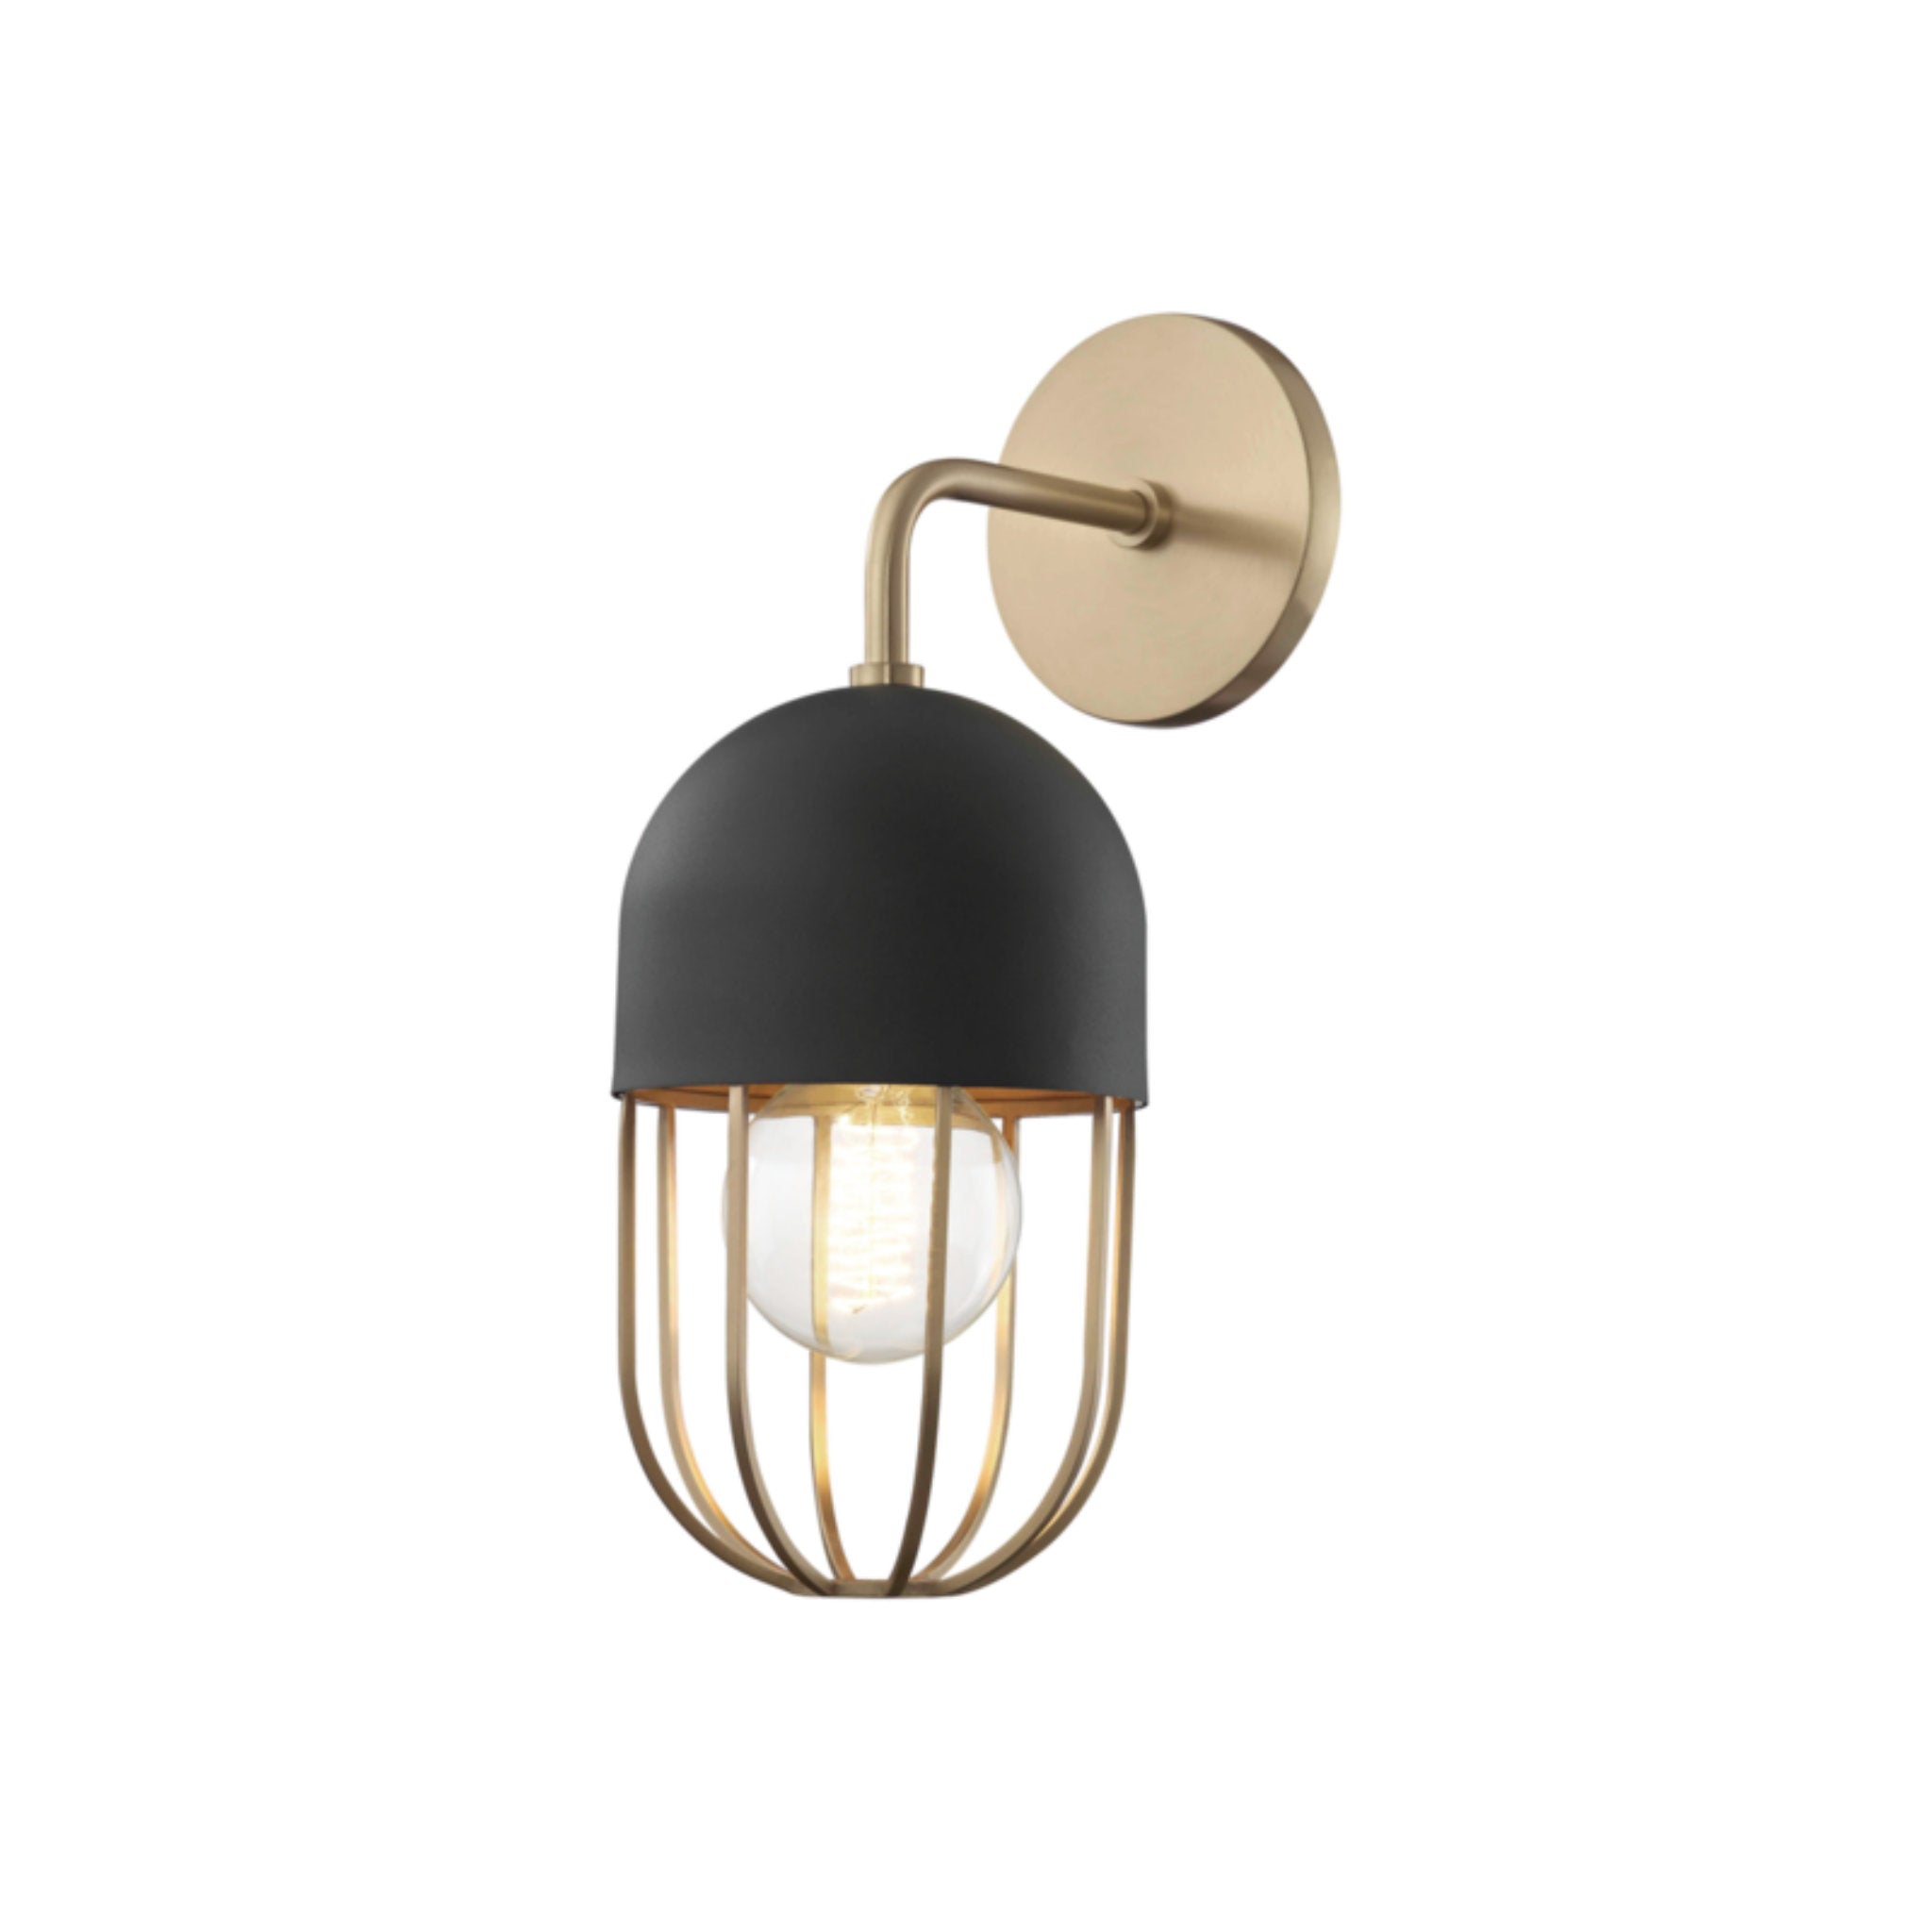 Haley 1-Light Wall Sconce in Aged Brass/Black